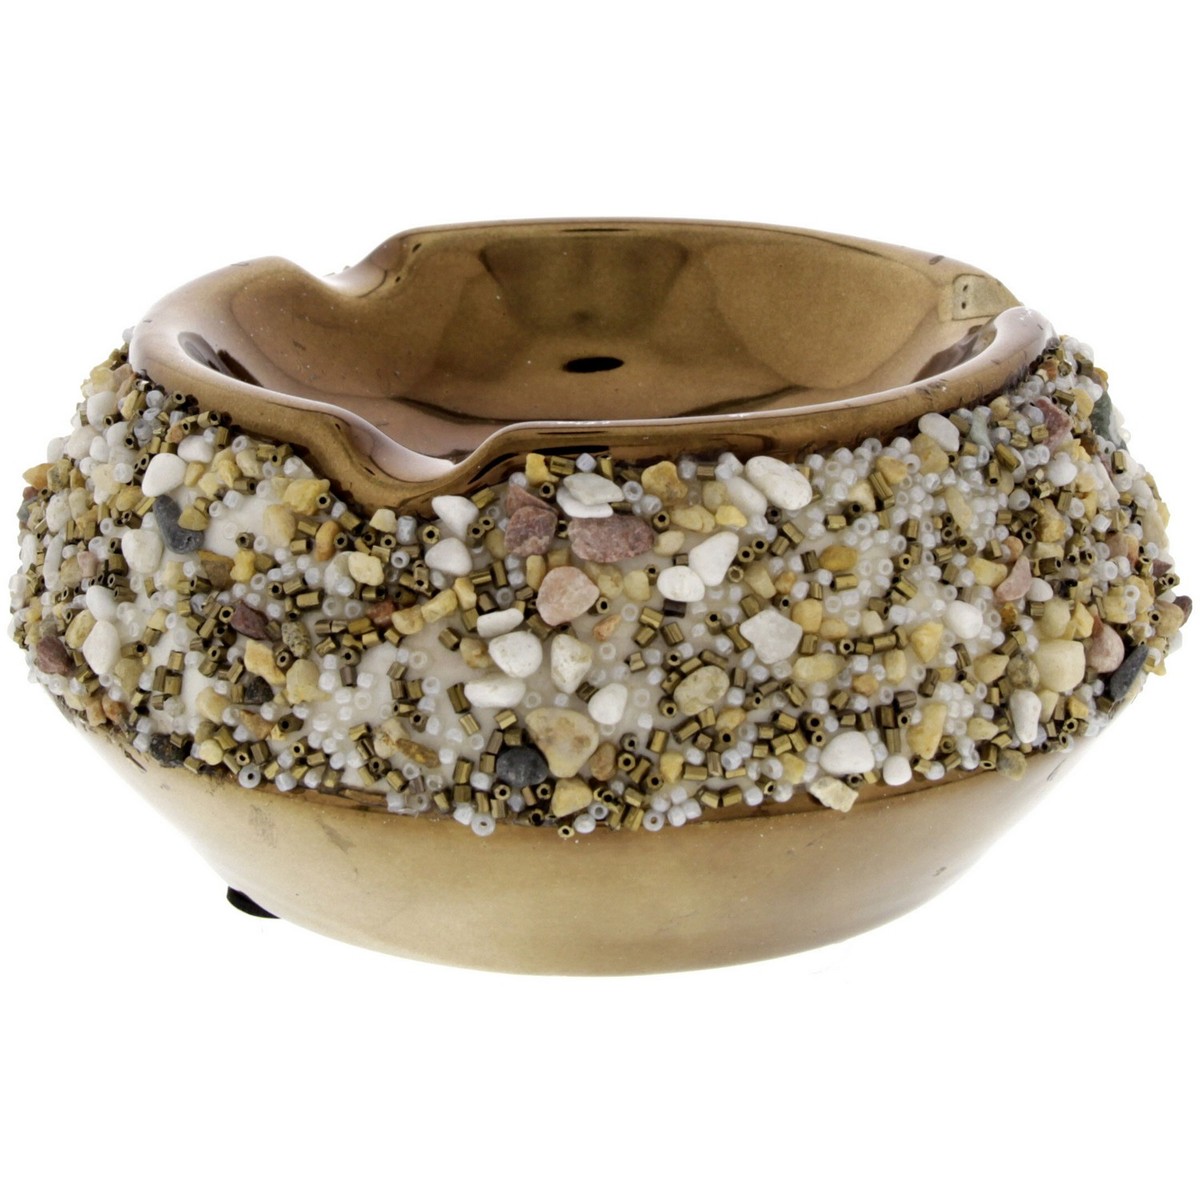 Home Style Ceramic Ashtray with Decoration HT1730-N